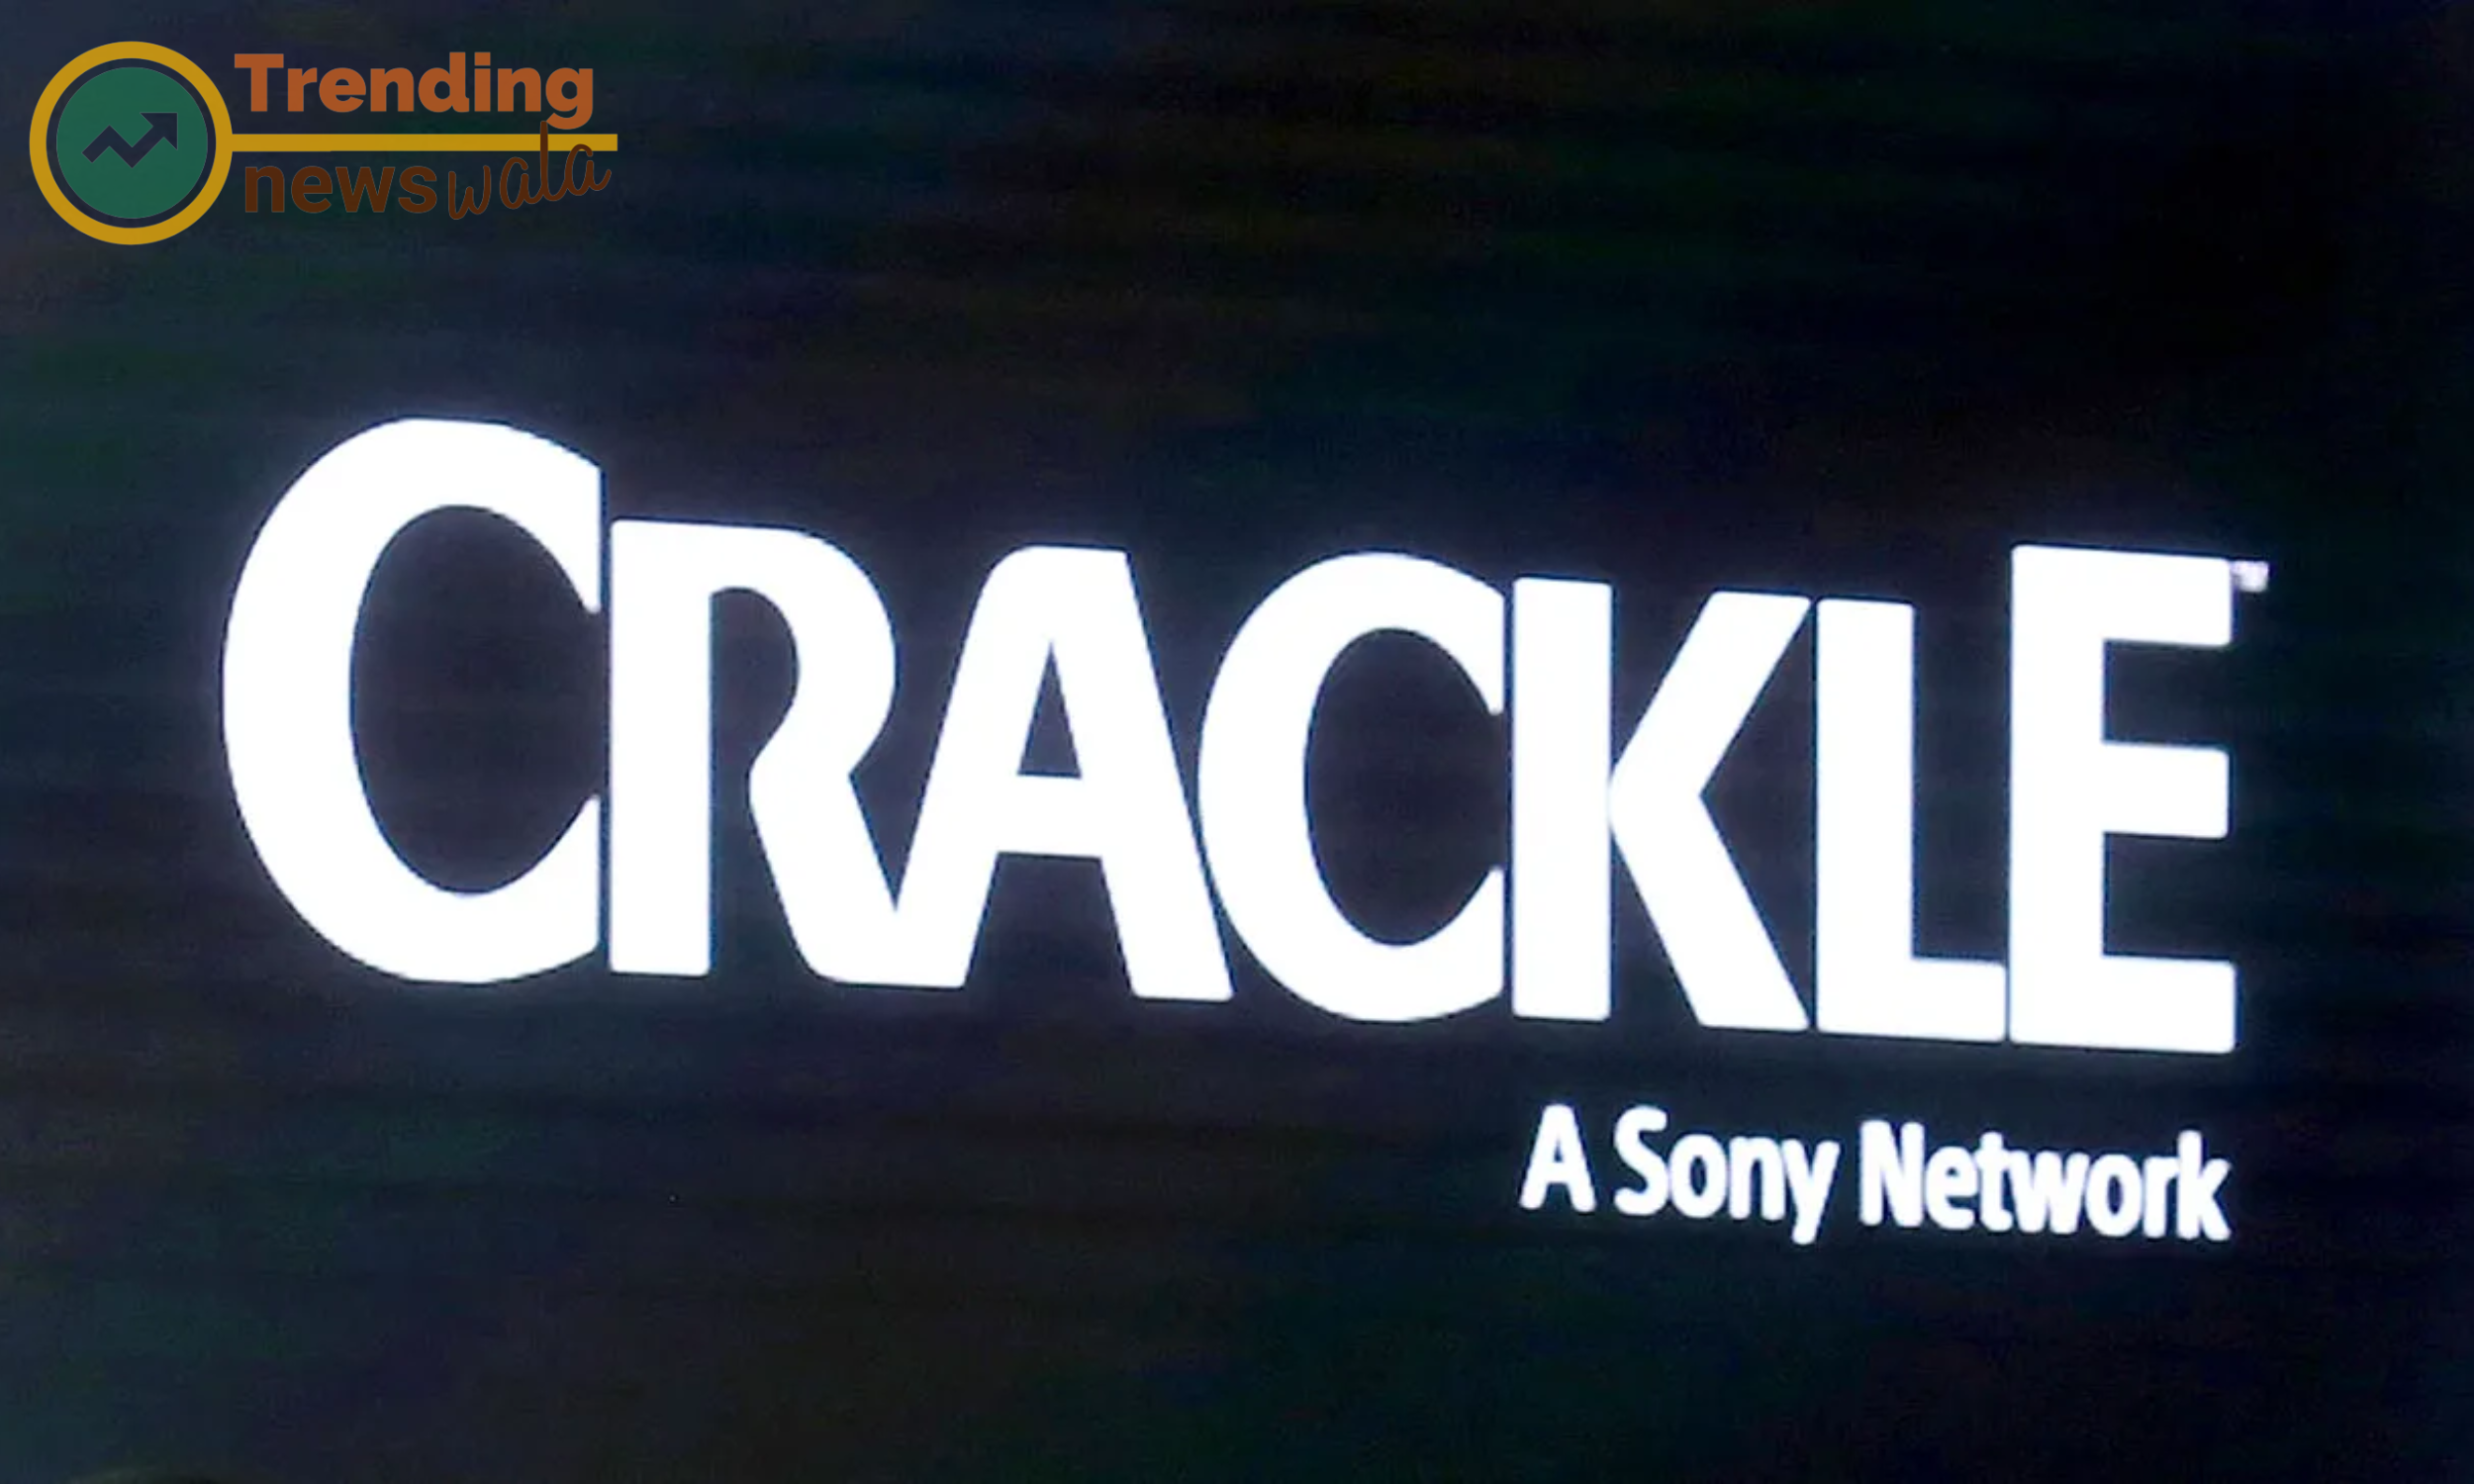 Crackle, owned by Sony Picture